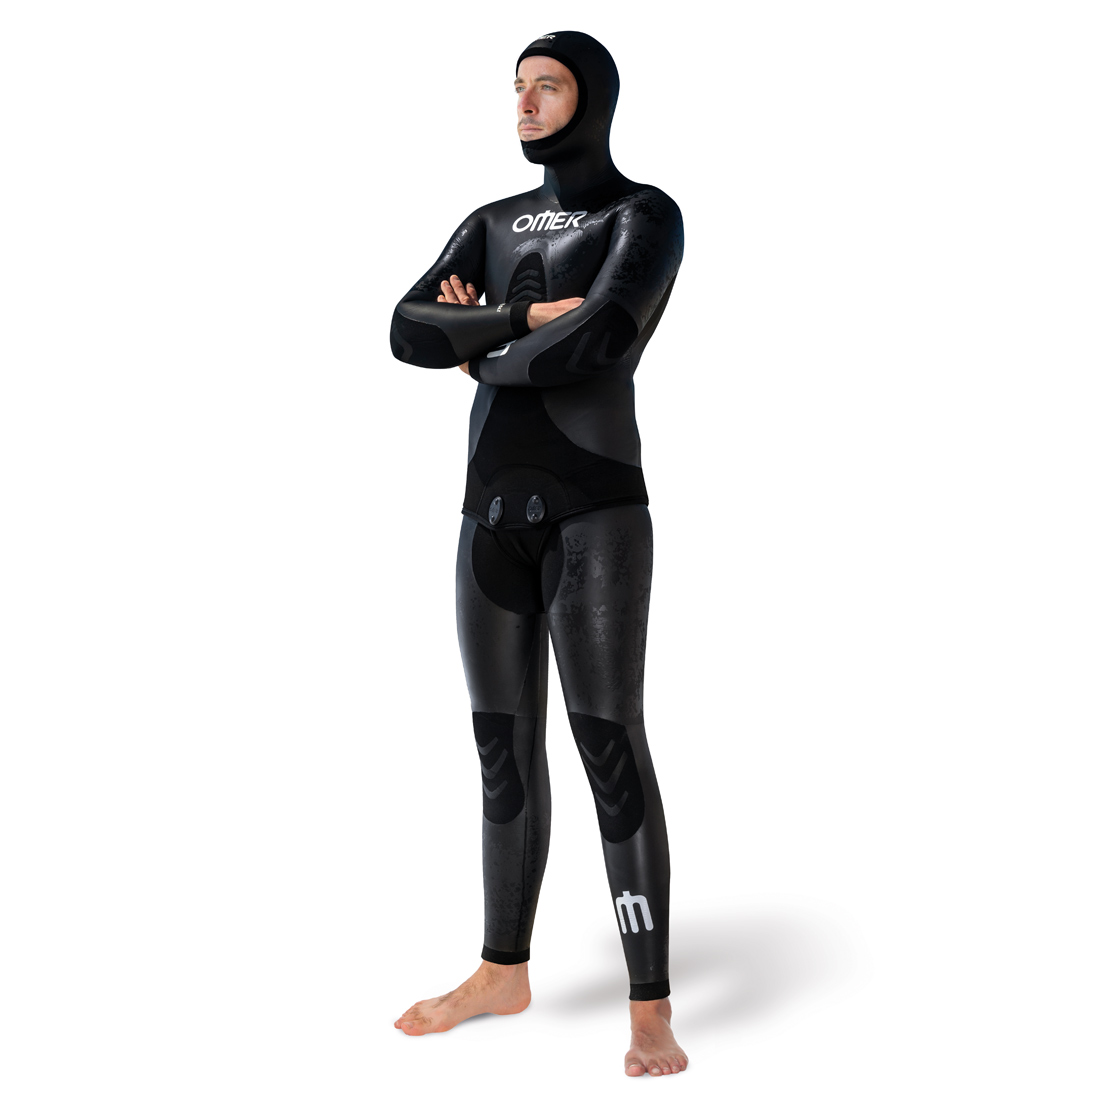 Dive Skin vs Wetsuit - Dive Site Blog - Your Source of Everything Scuba